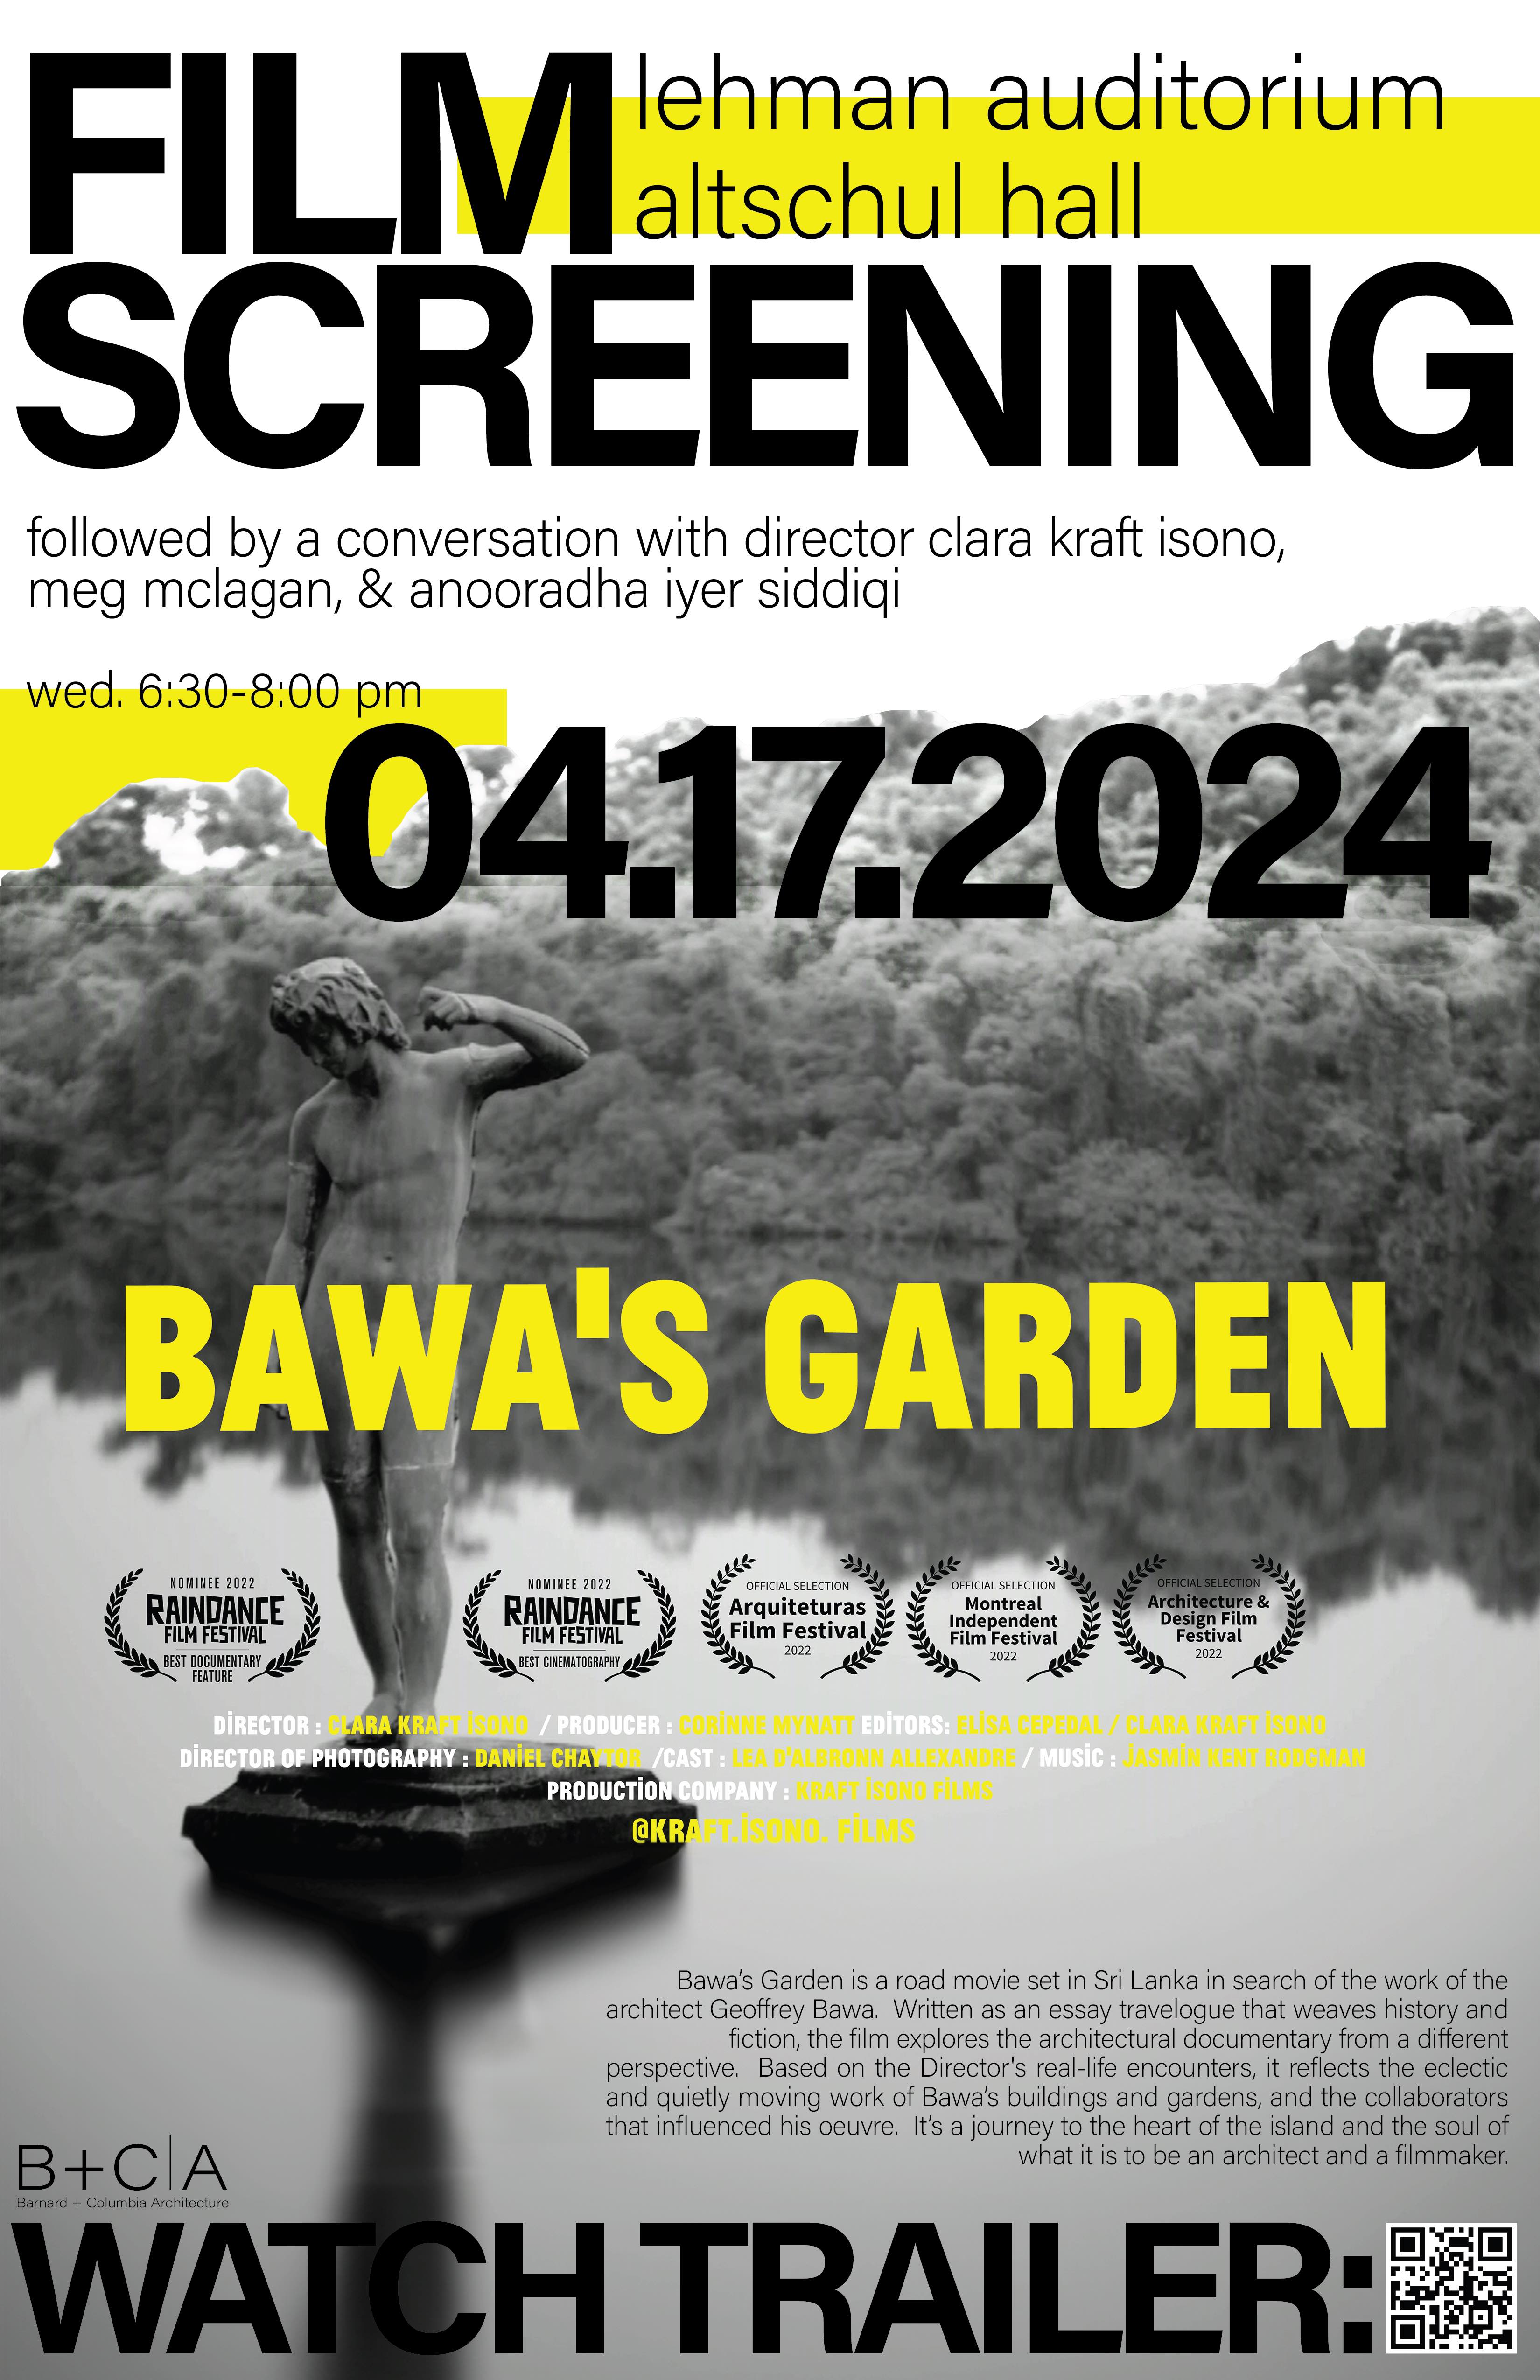 Poster for Bawa's Garden Screening Event